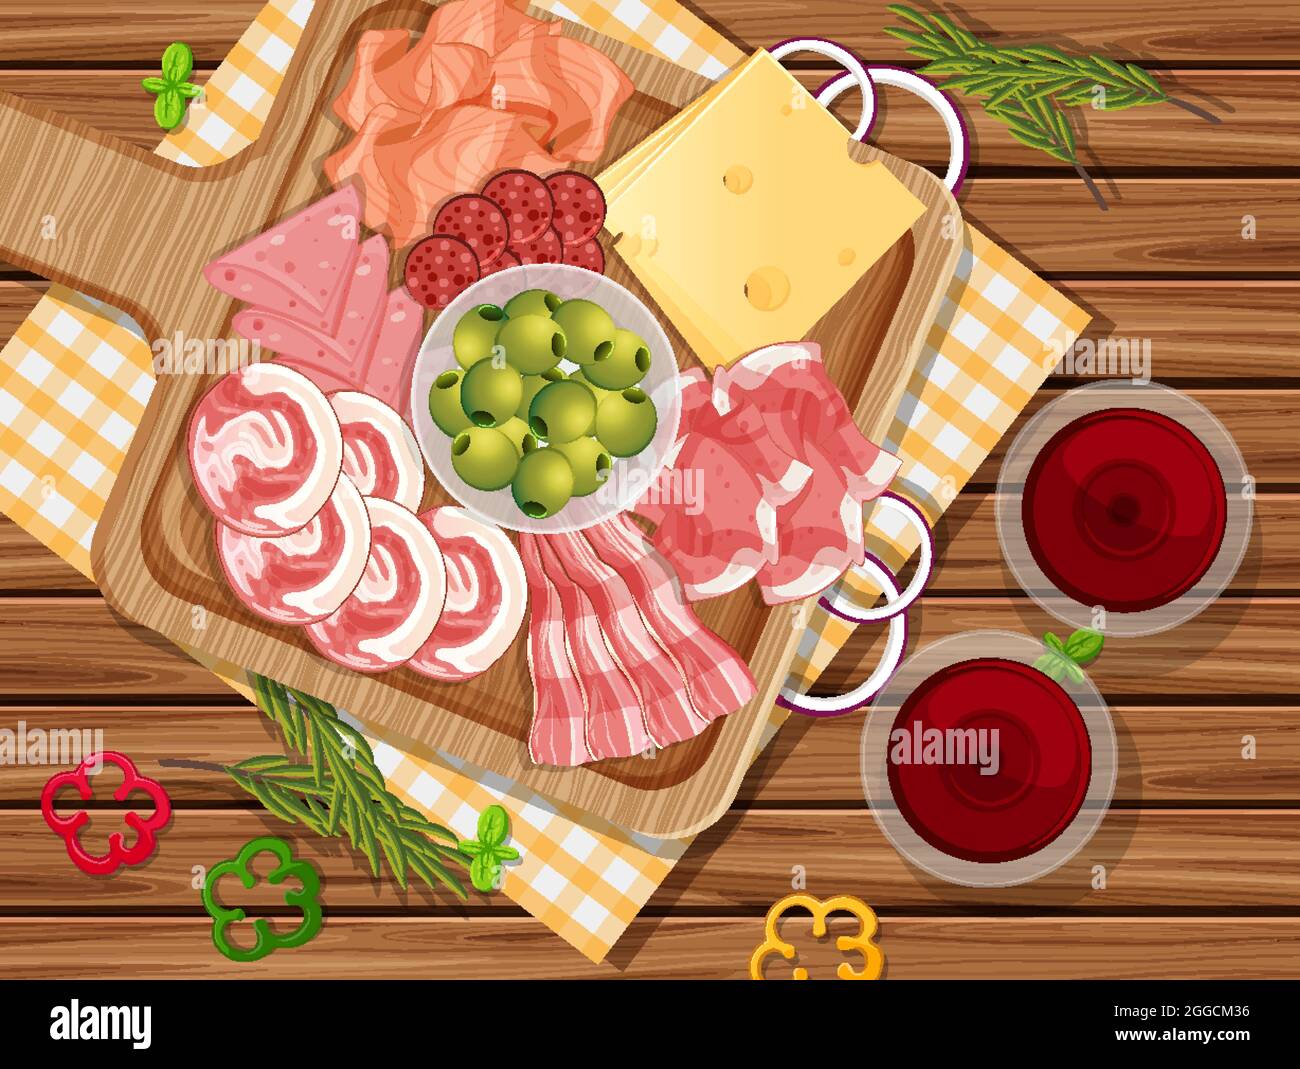 Platter of cold cuts and smoked meat on the wooden table background illustration Stock Vector